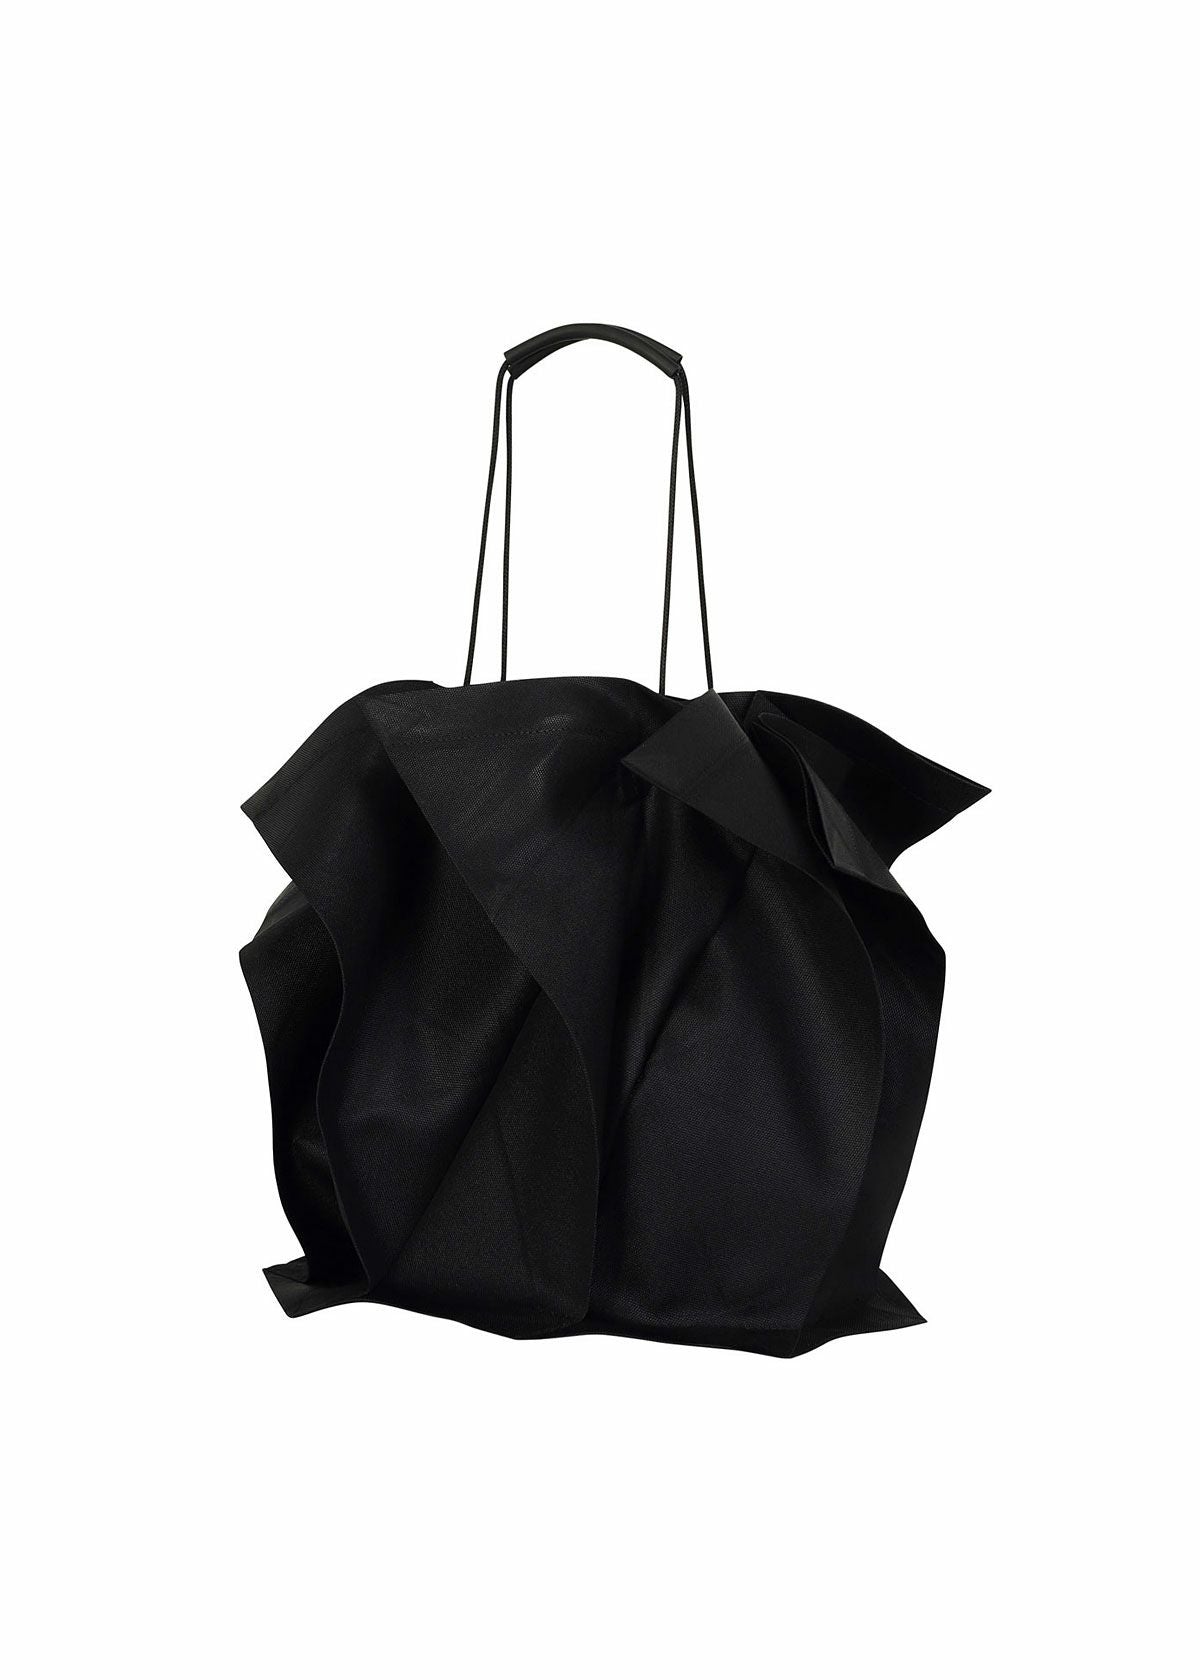 132 5. STANDARD BAG | The official ISSEY MIYAKE ONLINE STORE 